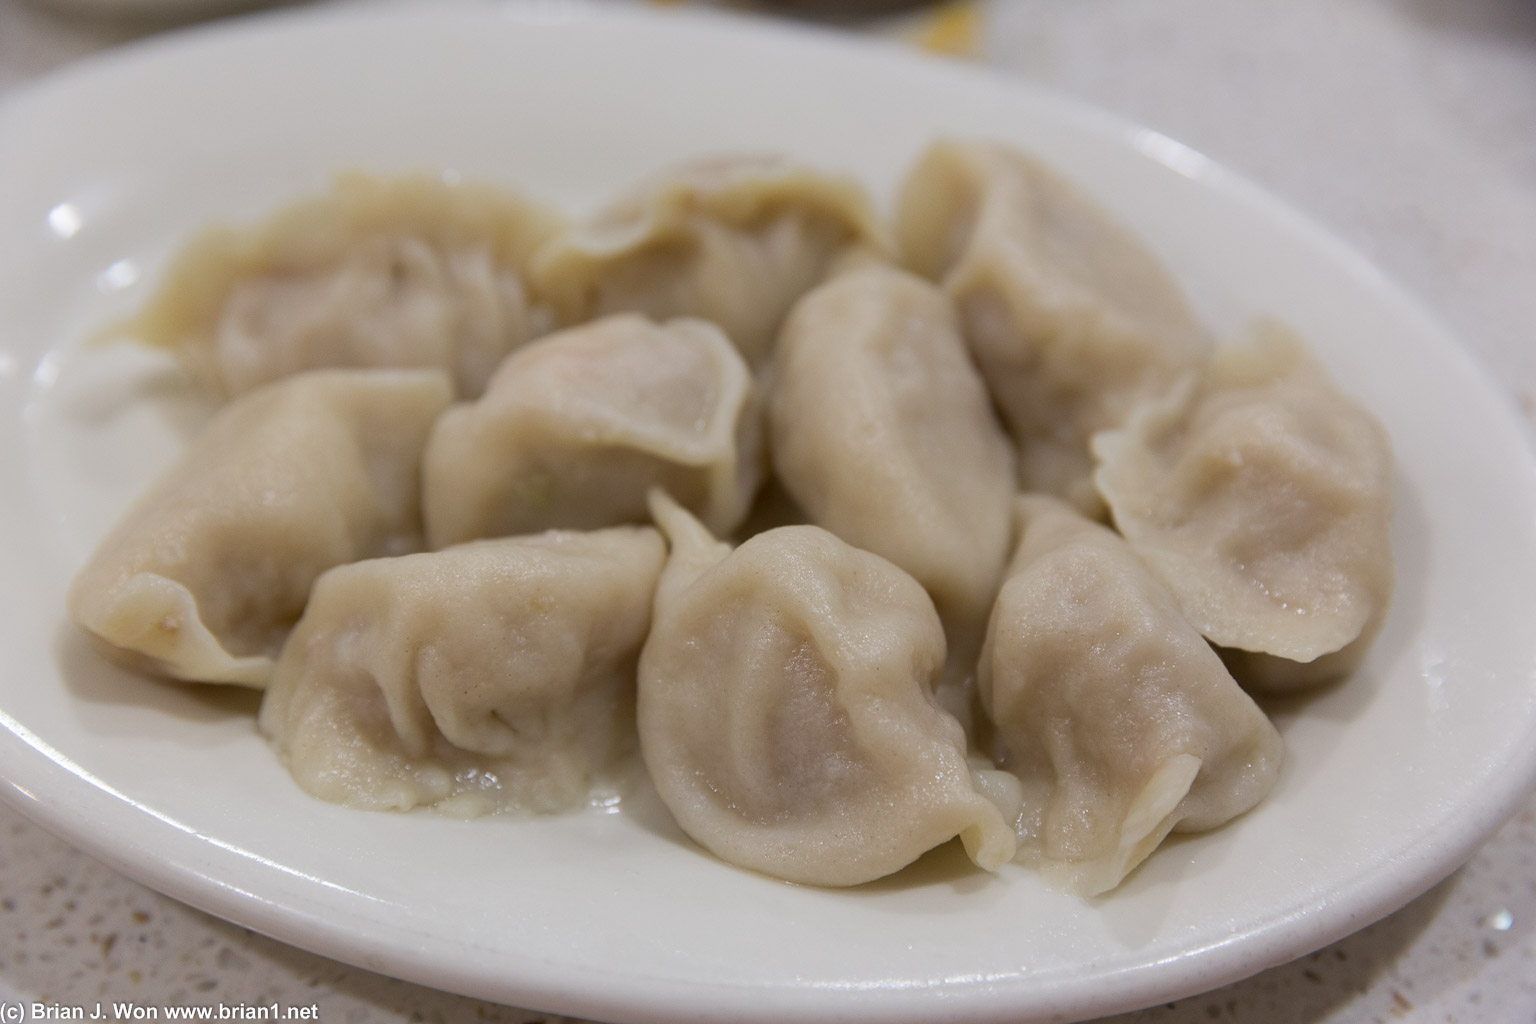 Dumplings here are just okay-- I prefer more simple fillings, they go more fancy here.